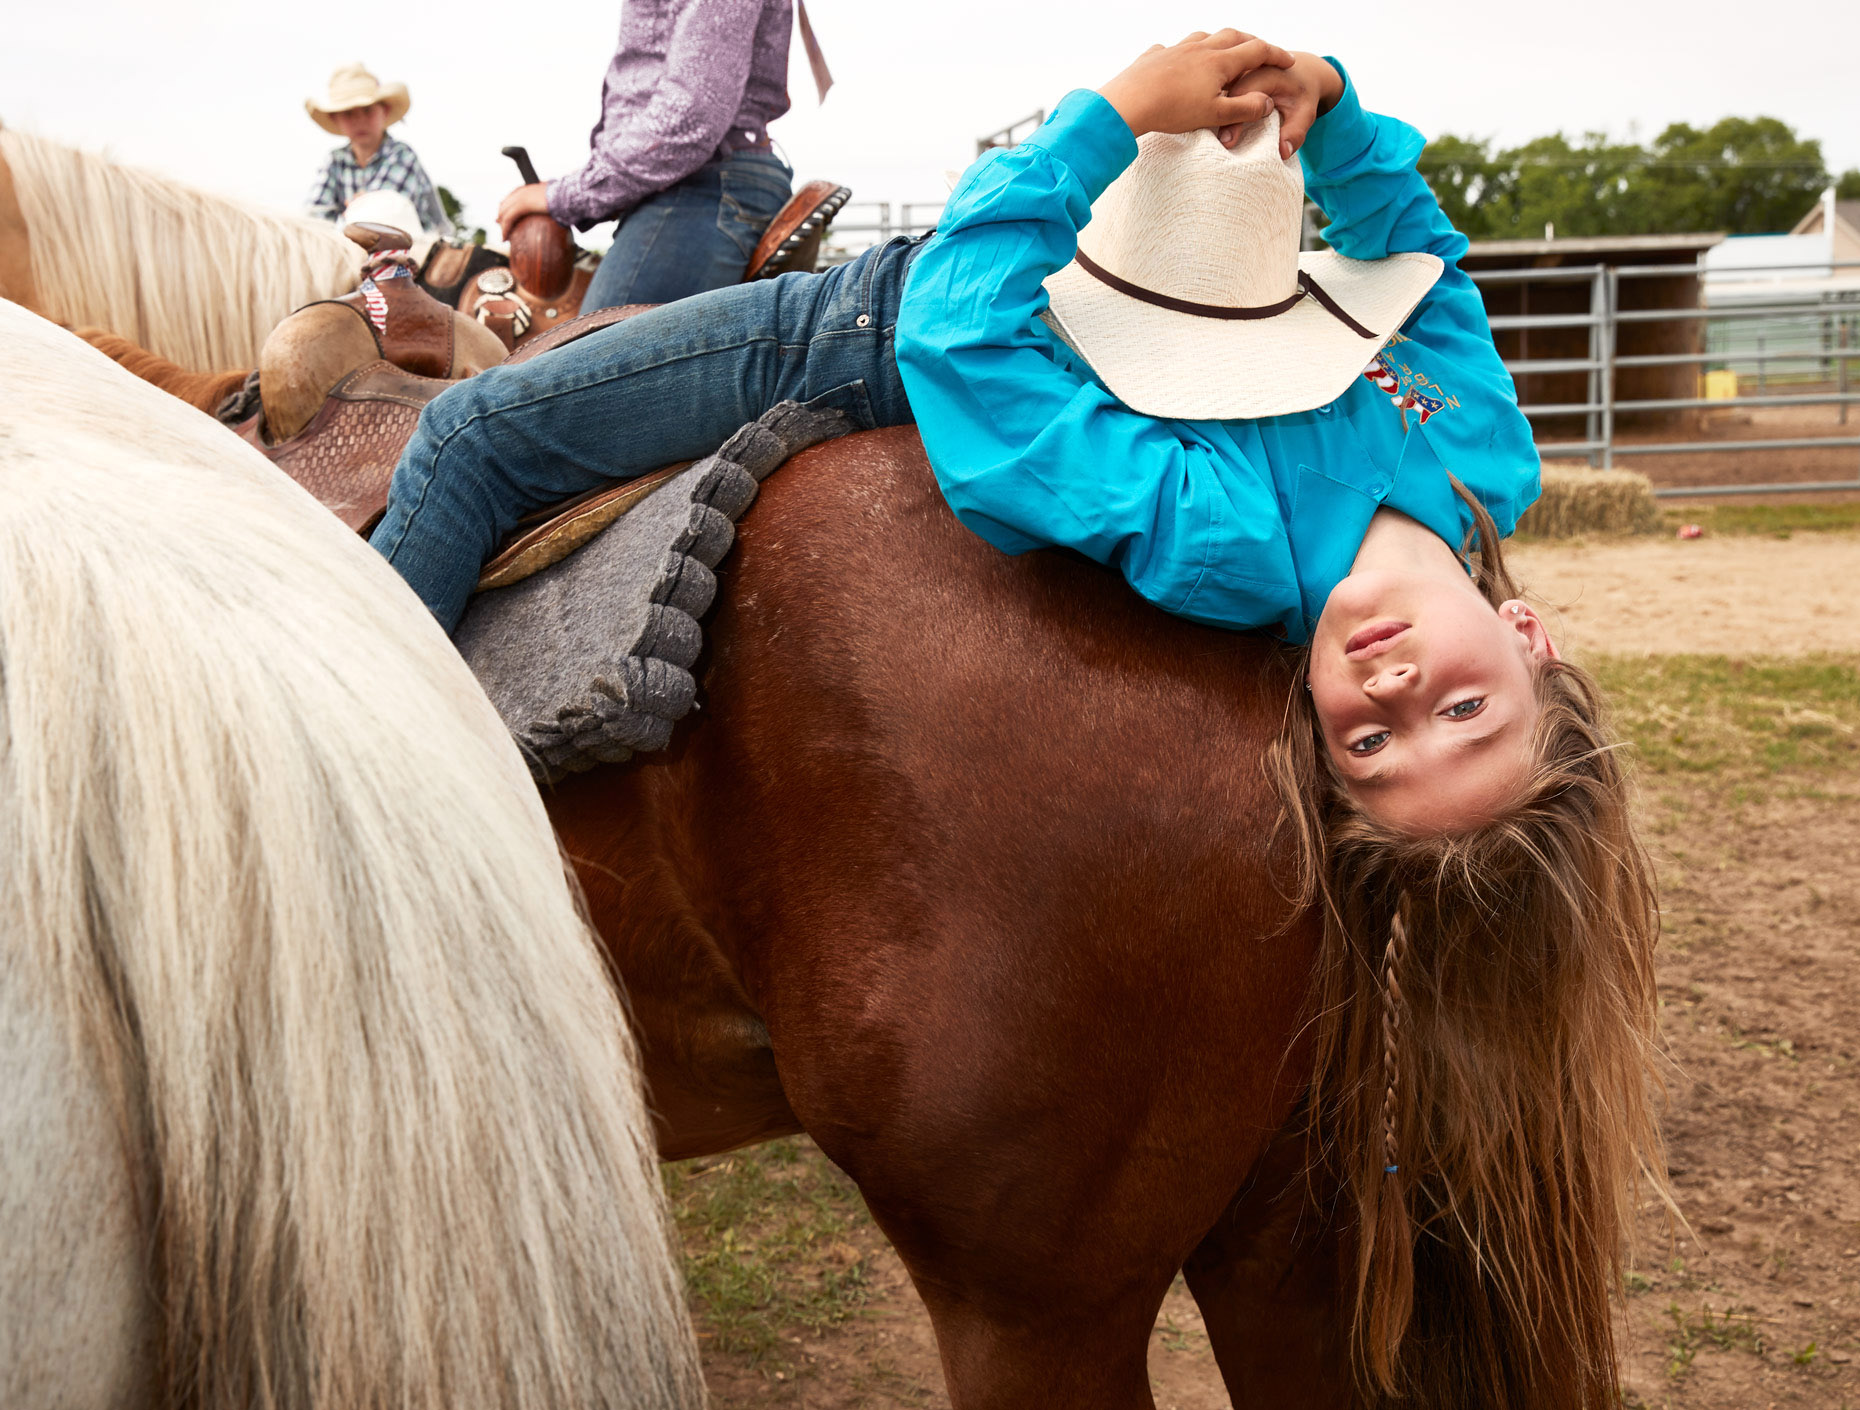 Young girl at youth rodeo competition | kids photography by Saverio Truglia